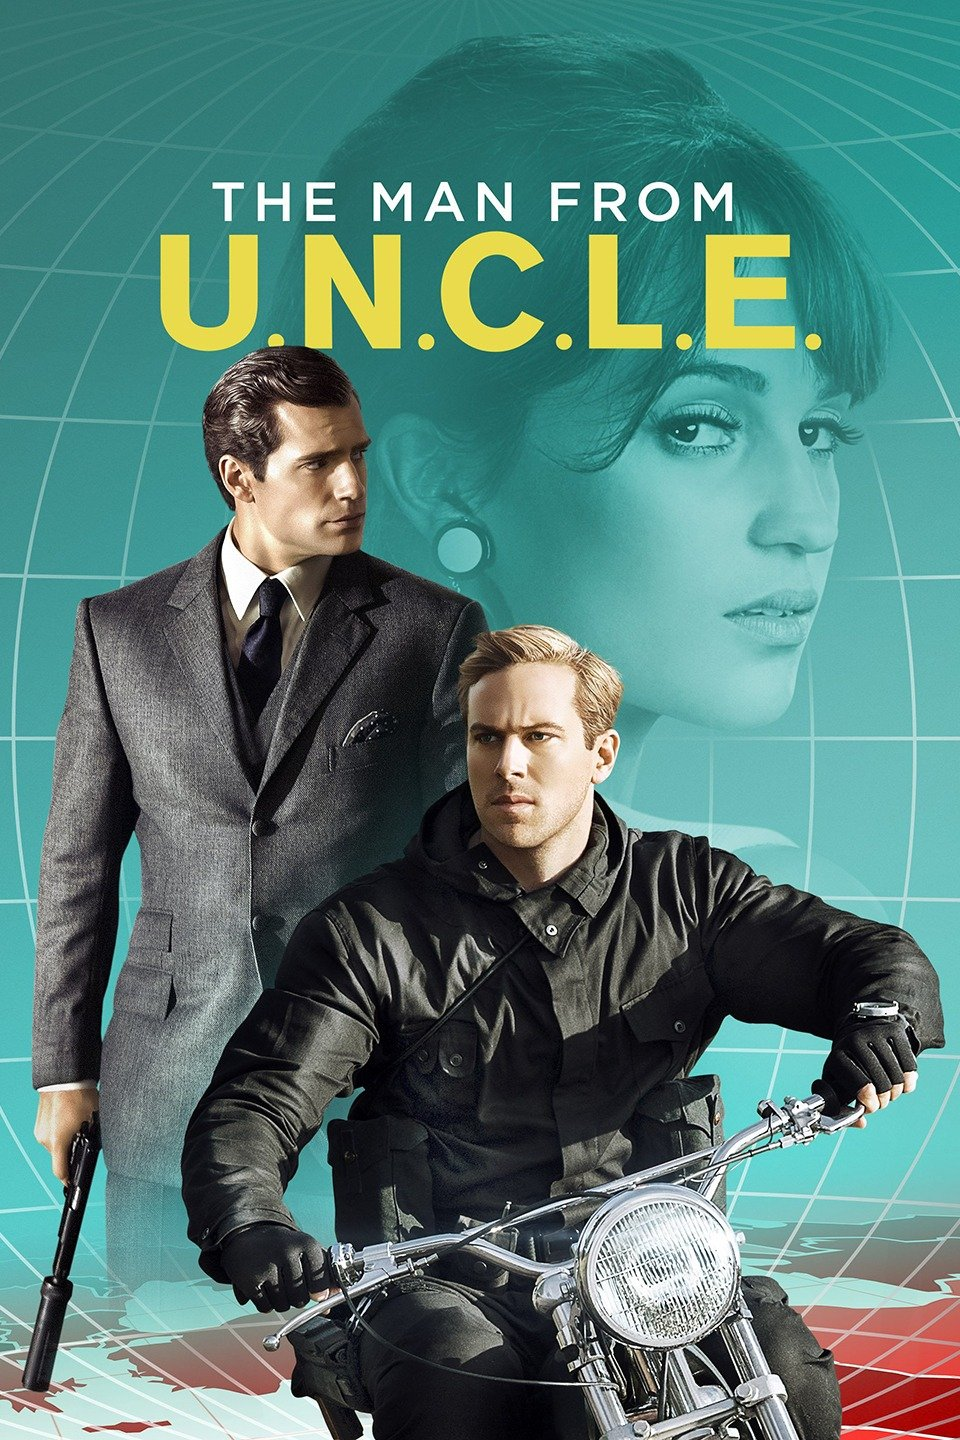 Henry Cavill hit movie: The Man from U.N,C.L.E. (2015)